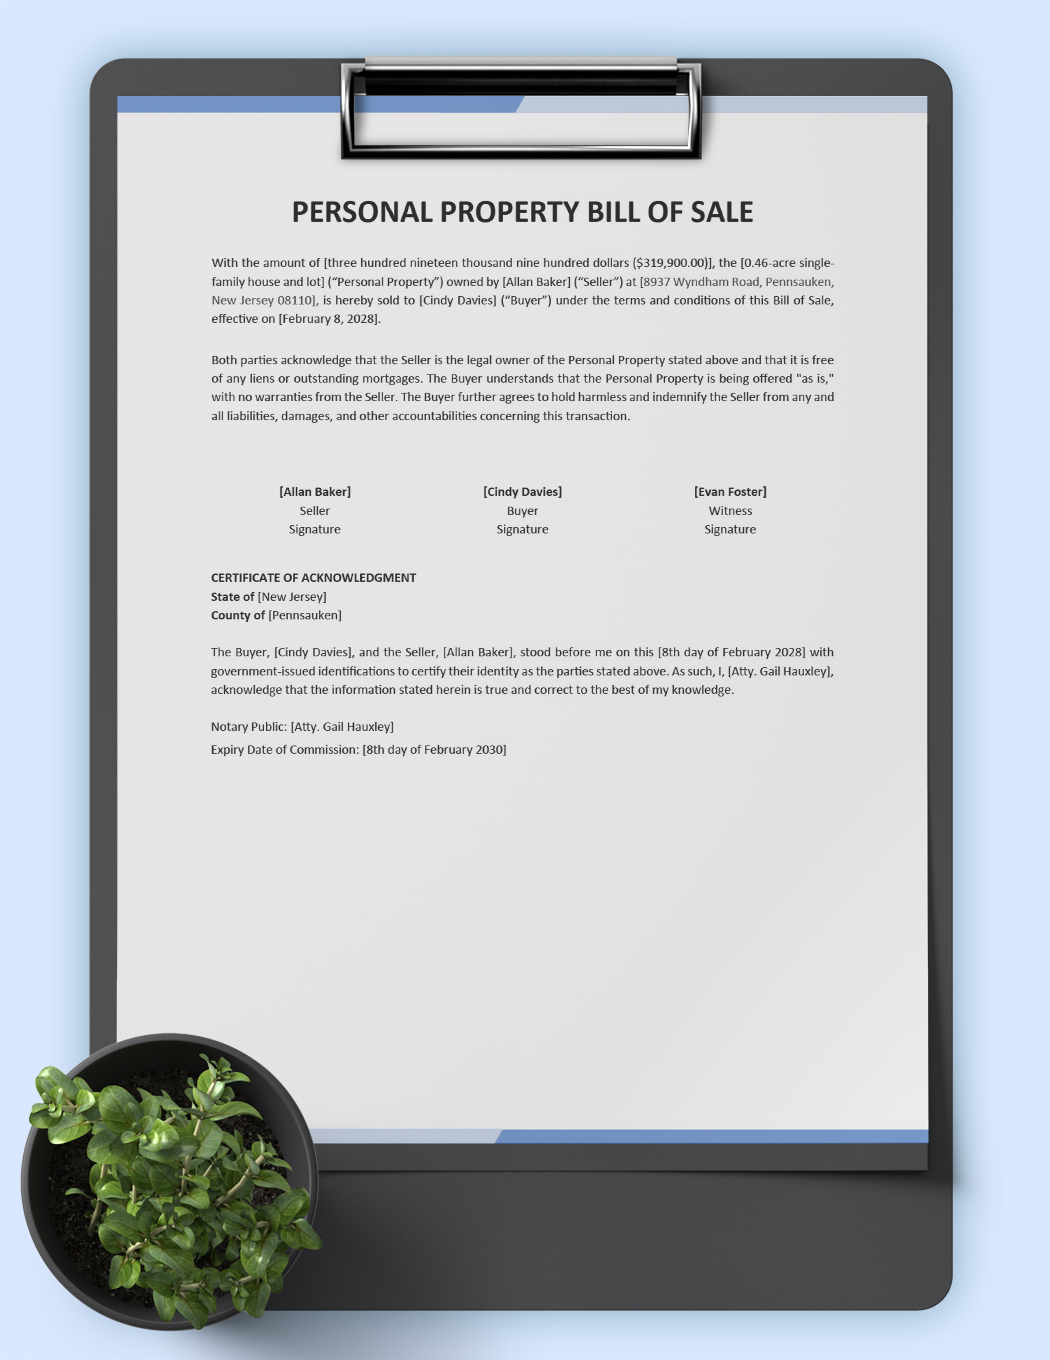 Personal Property Bill of Sale Template